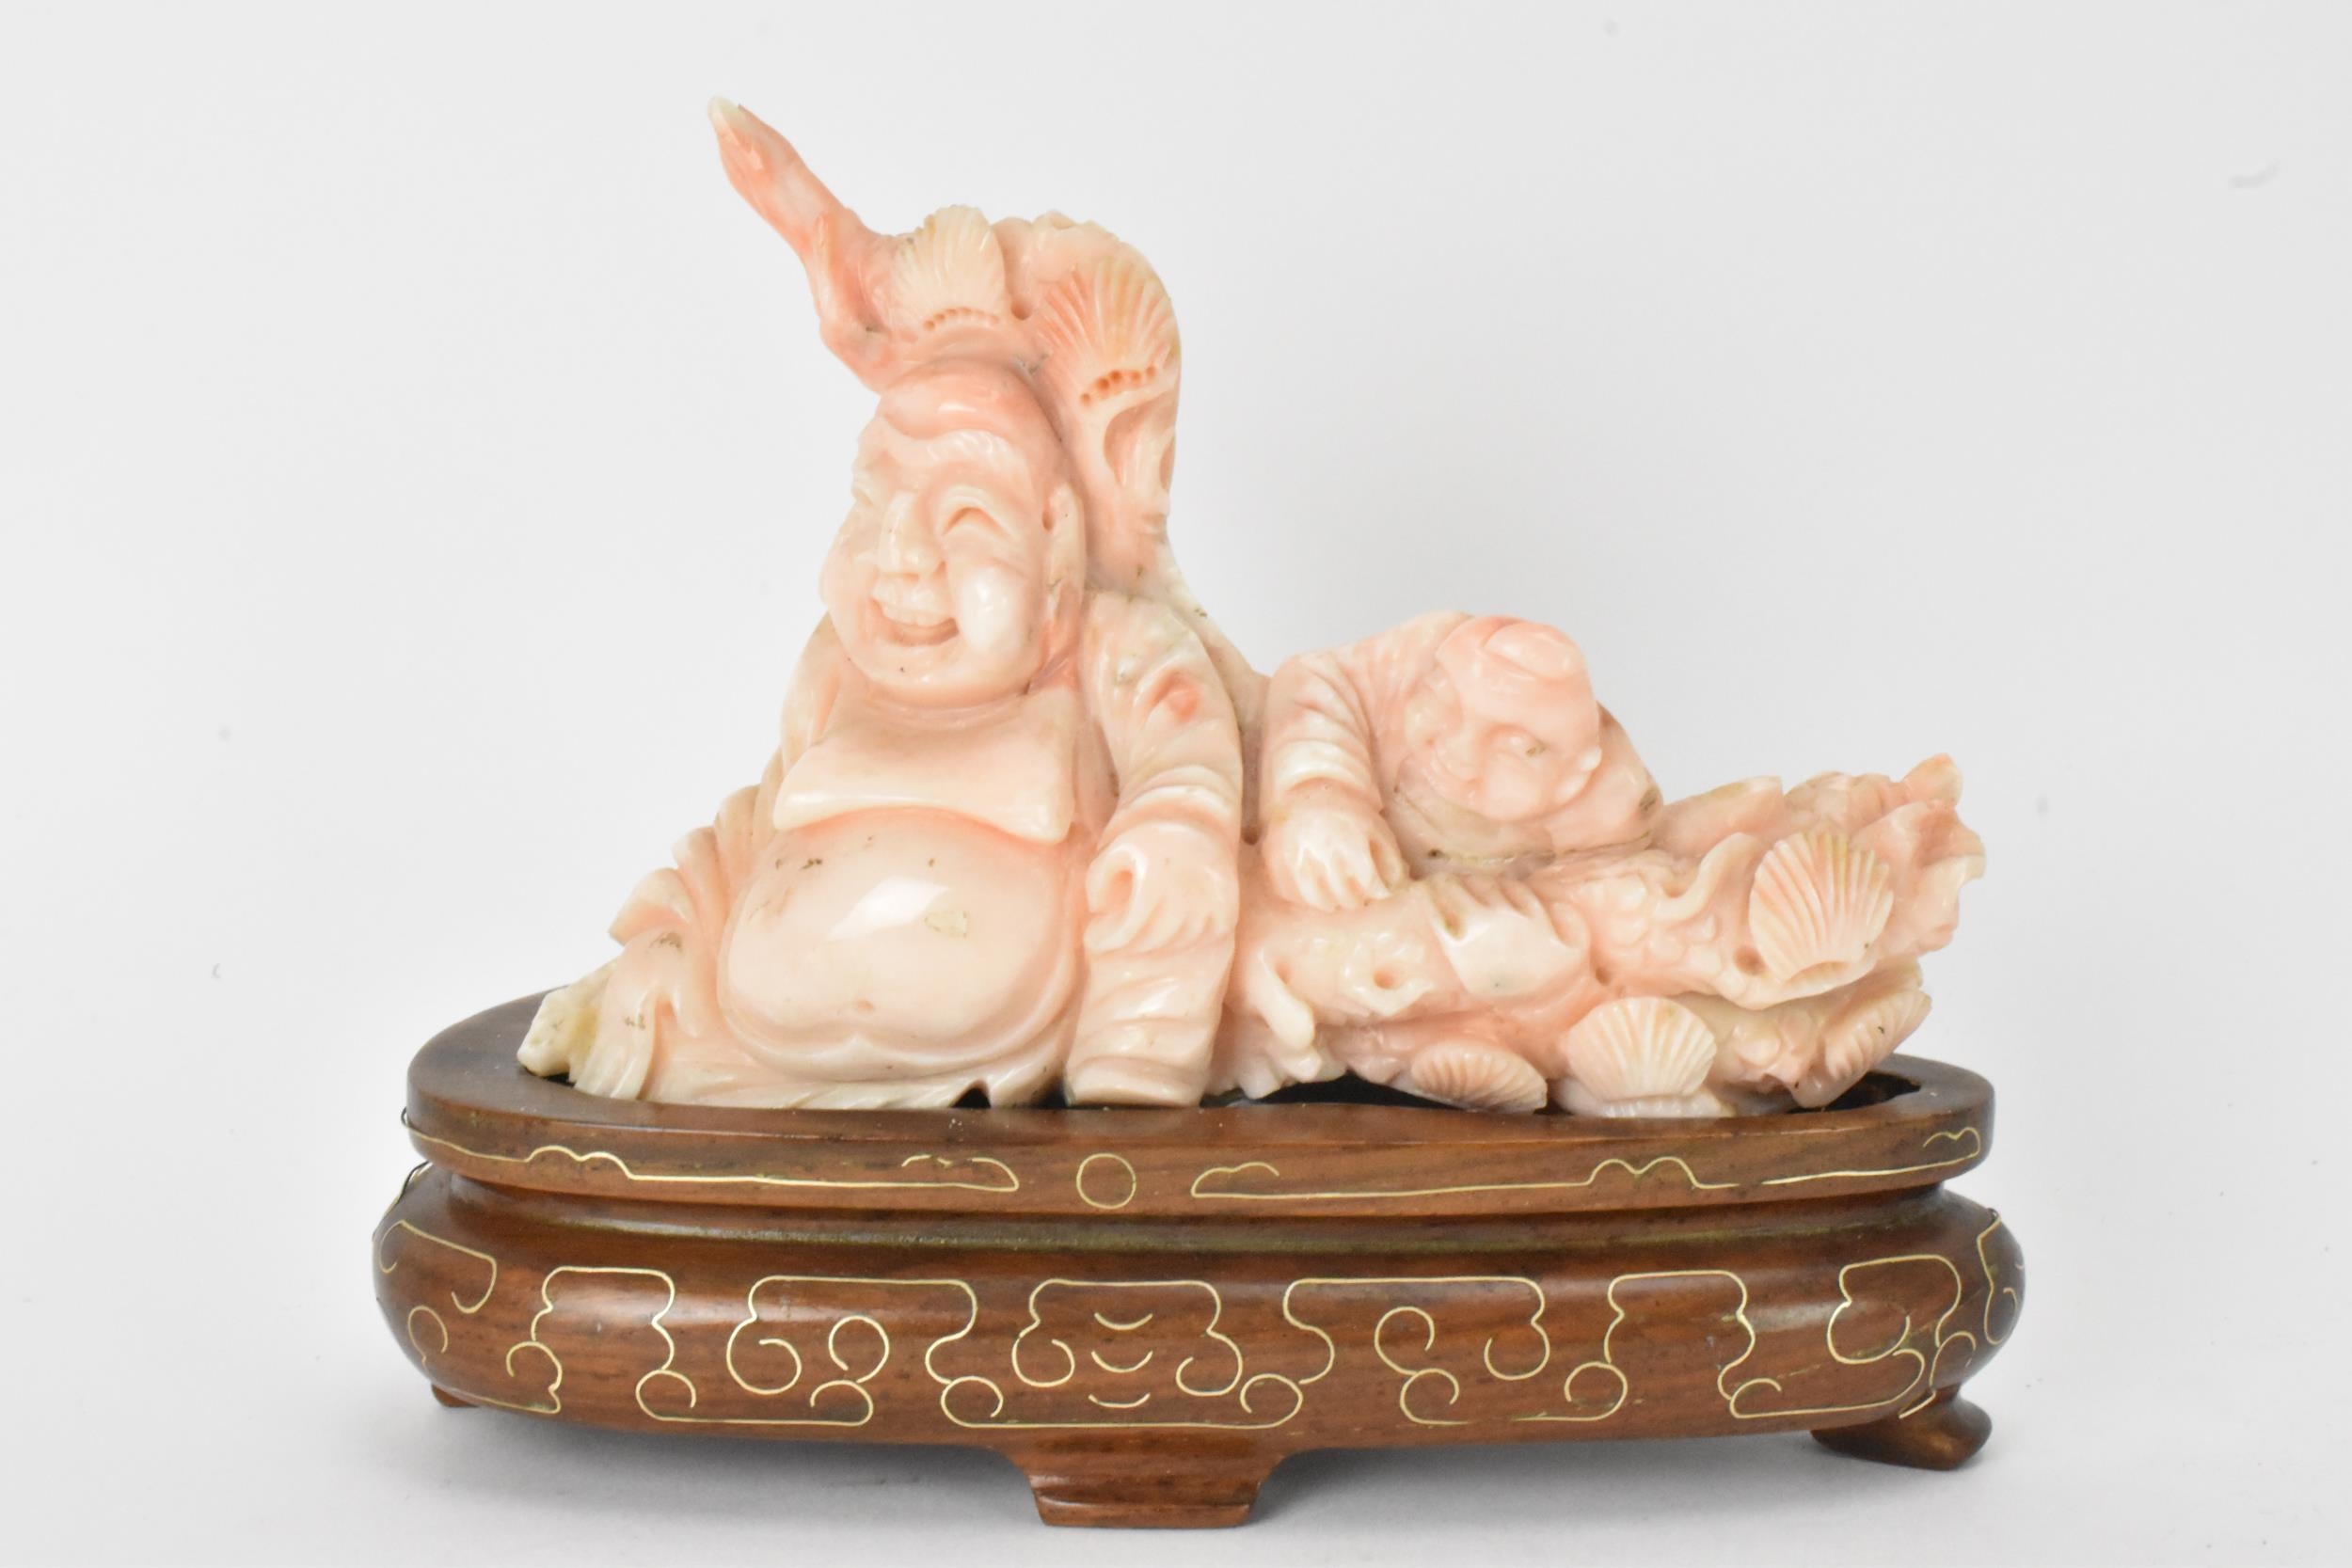 A Chinese 20th century coral carving depicting a laughing Buddha with child among a nautical